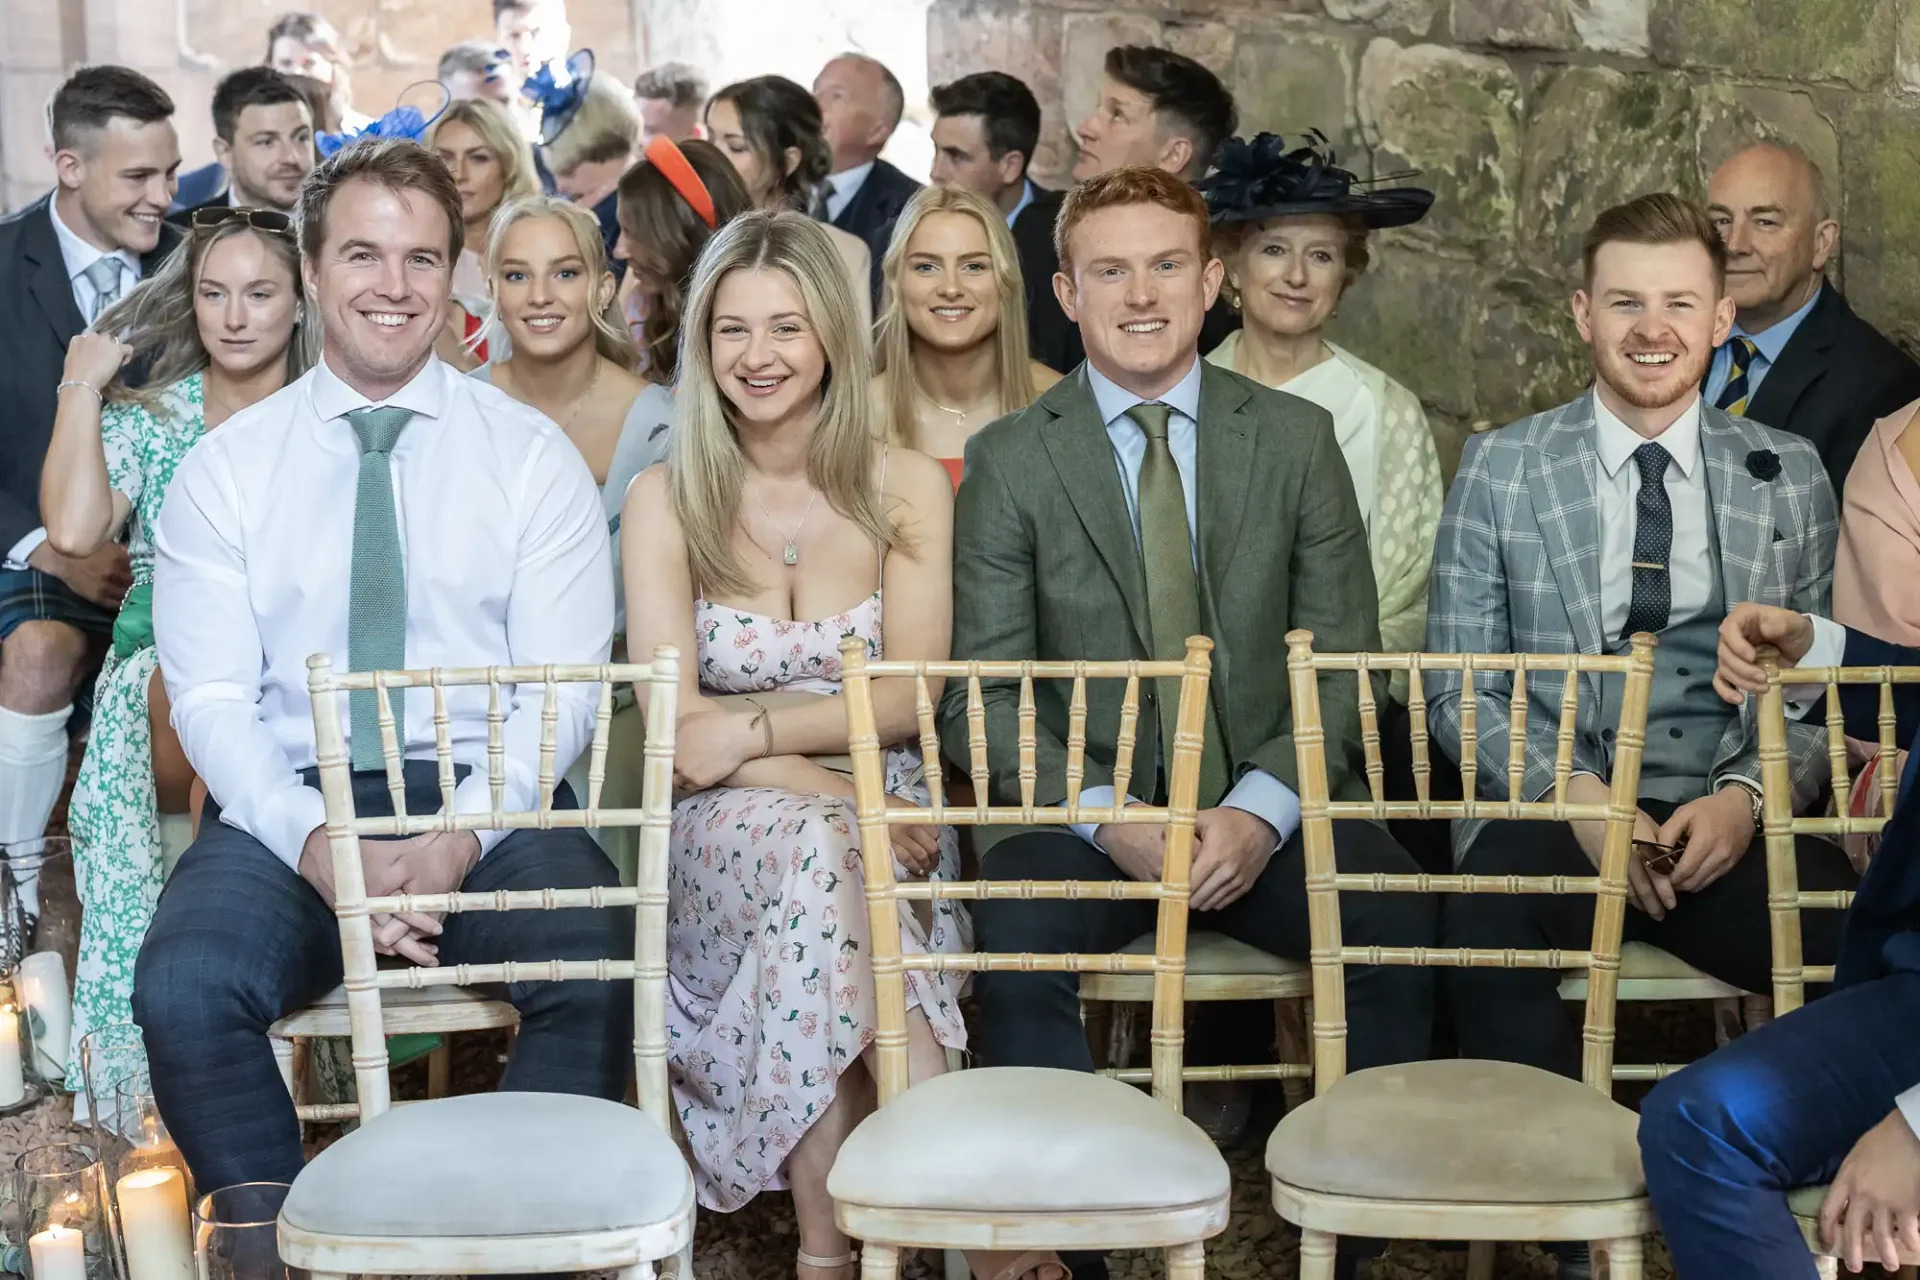 Guests smiling and sitting in rows at a wedding ceremony inside a stone-walled venue with wooden chairs and candle decorations.